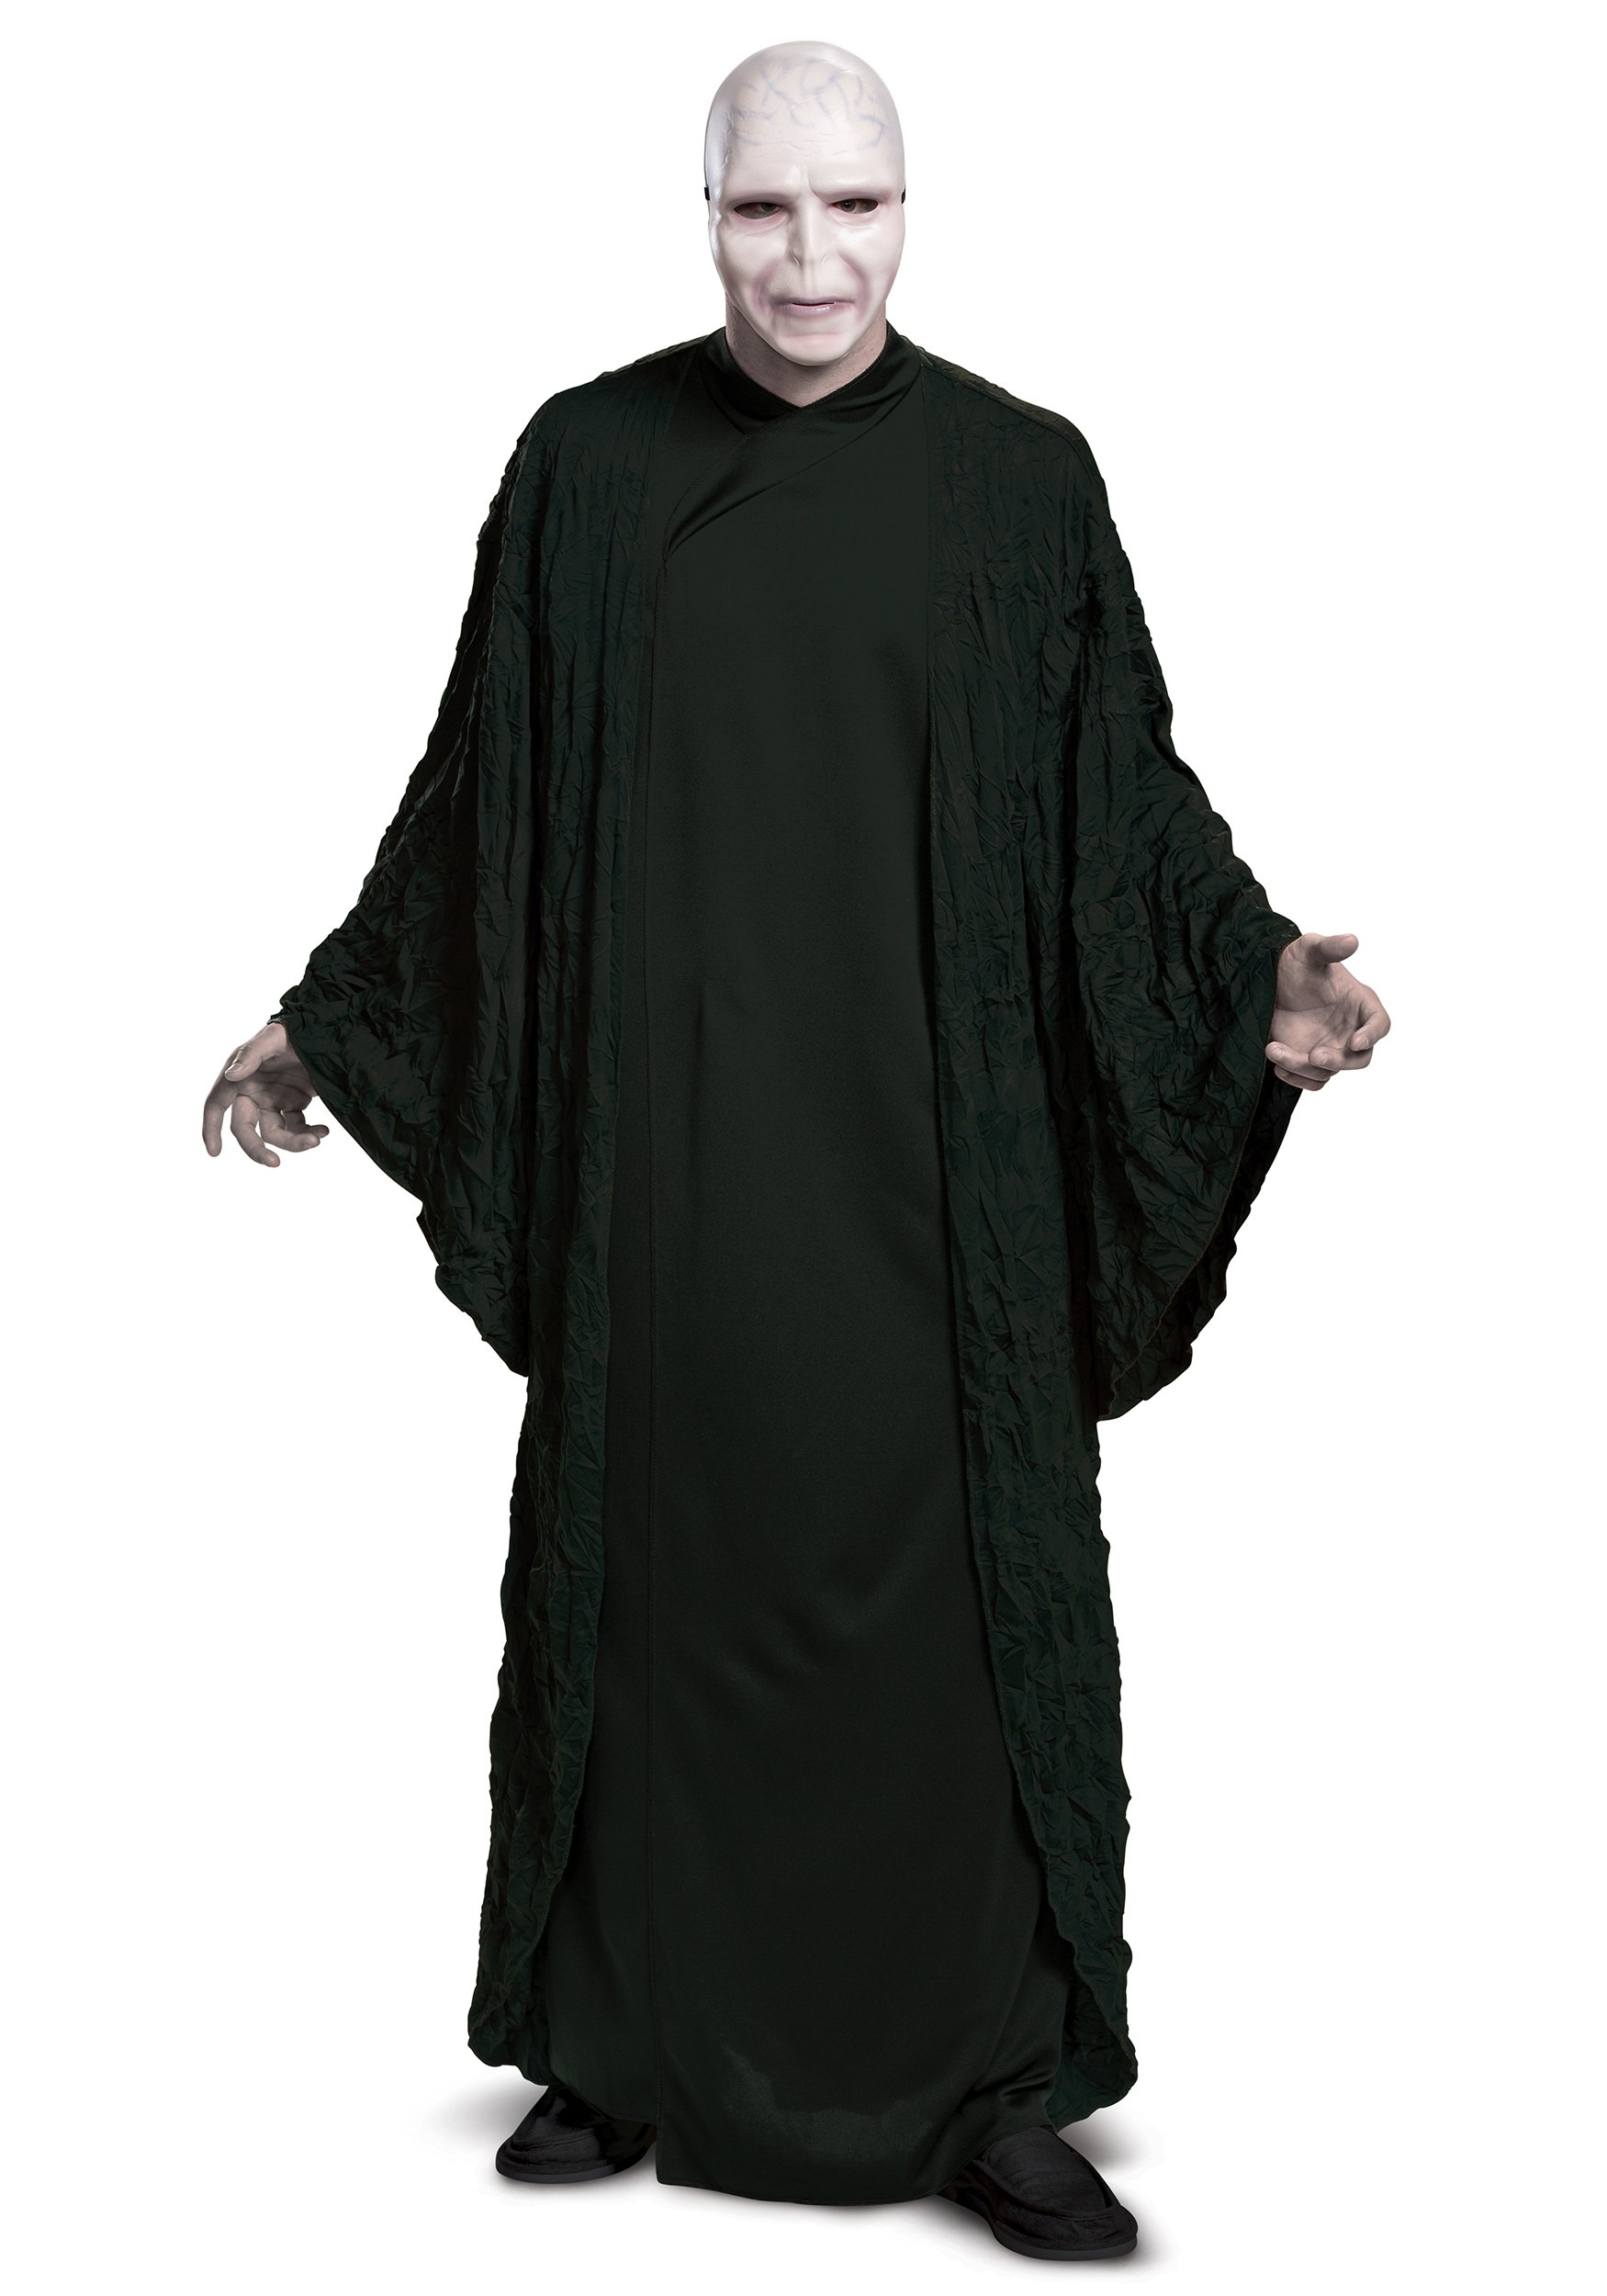 Photos - Fancy Dress Disguise Harry Potter Voldemort Deluxe Costume For Adults Black/Gray D